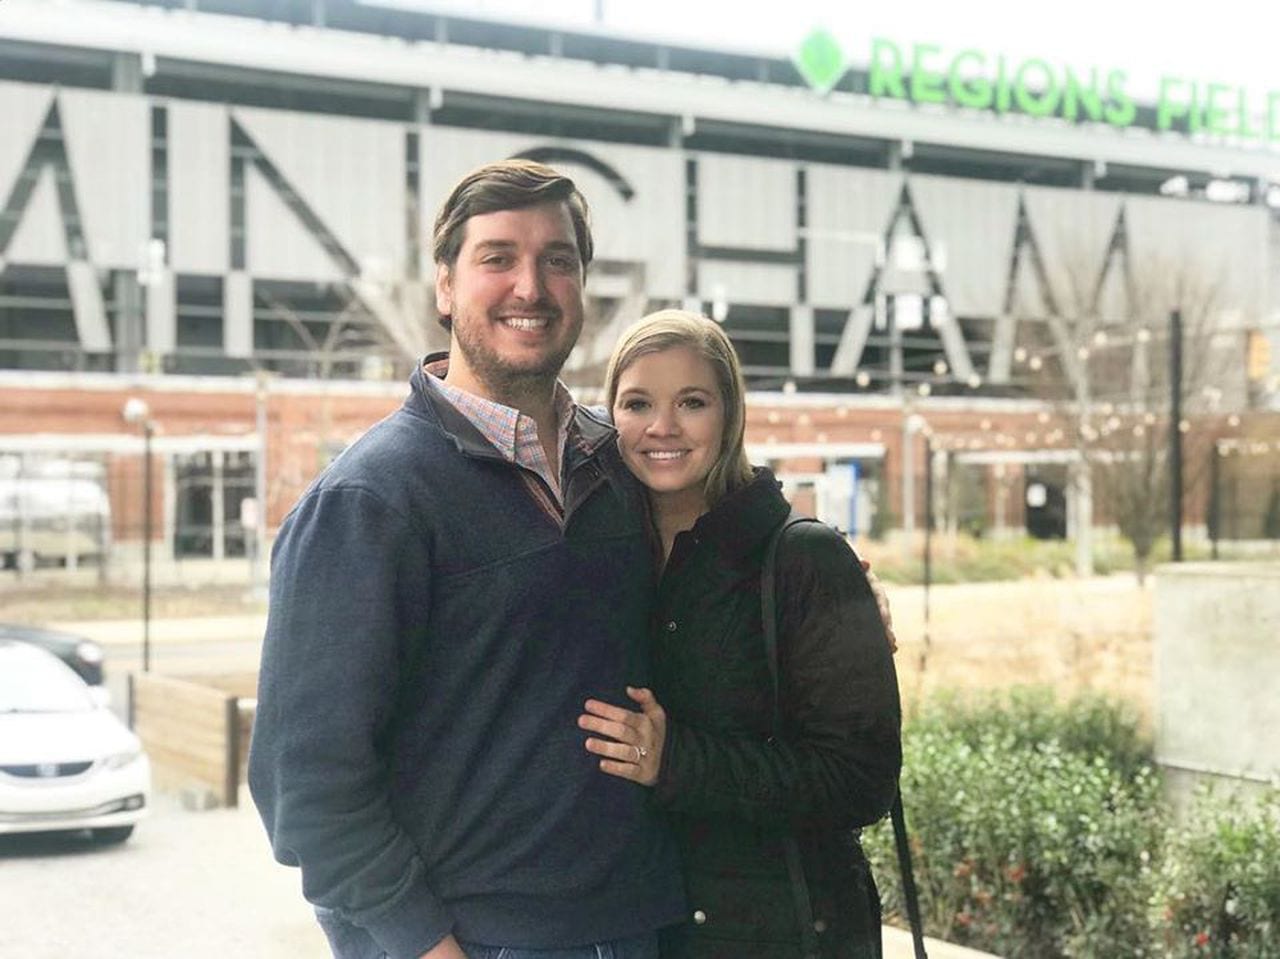 Alabama bride-to-be donates flowers from postponed wedding